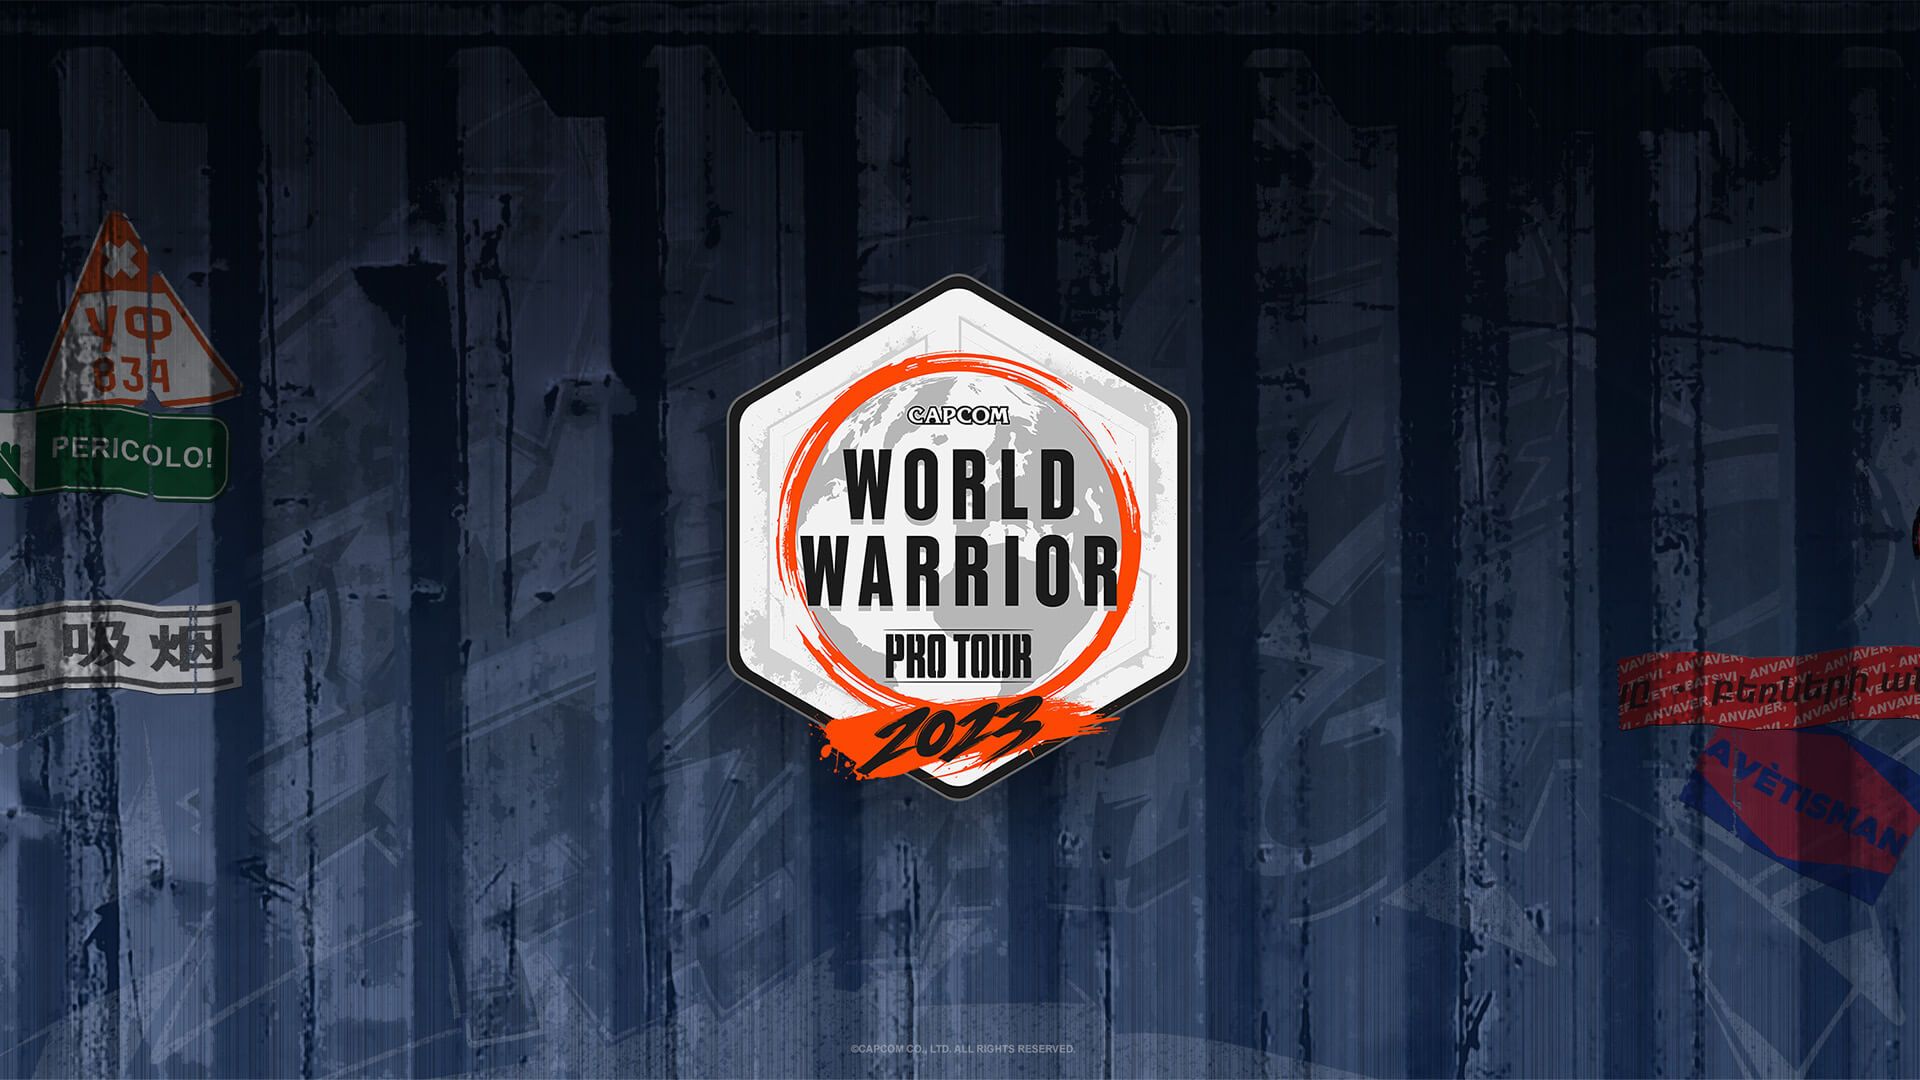 World Warrior Weekend Roundup #2: Xian Leads the Way in Asia Southeast